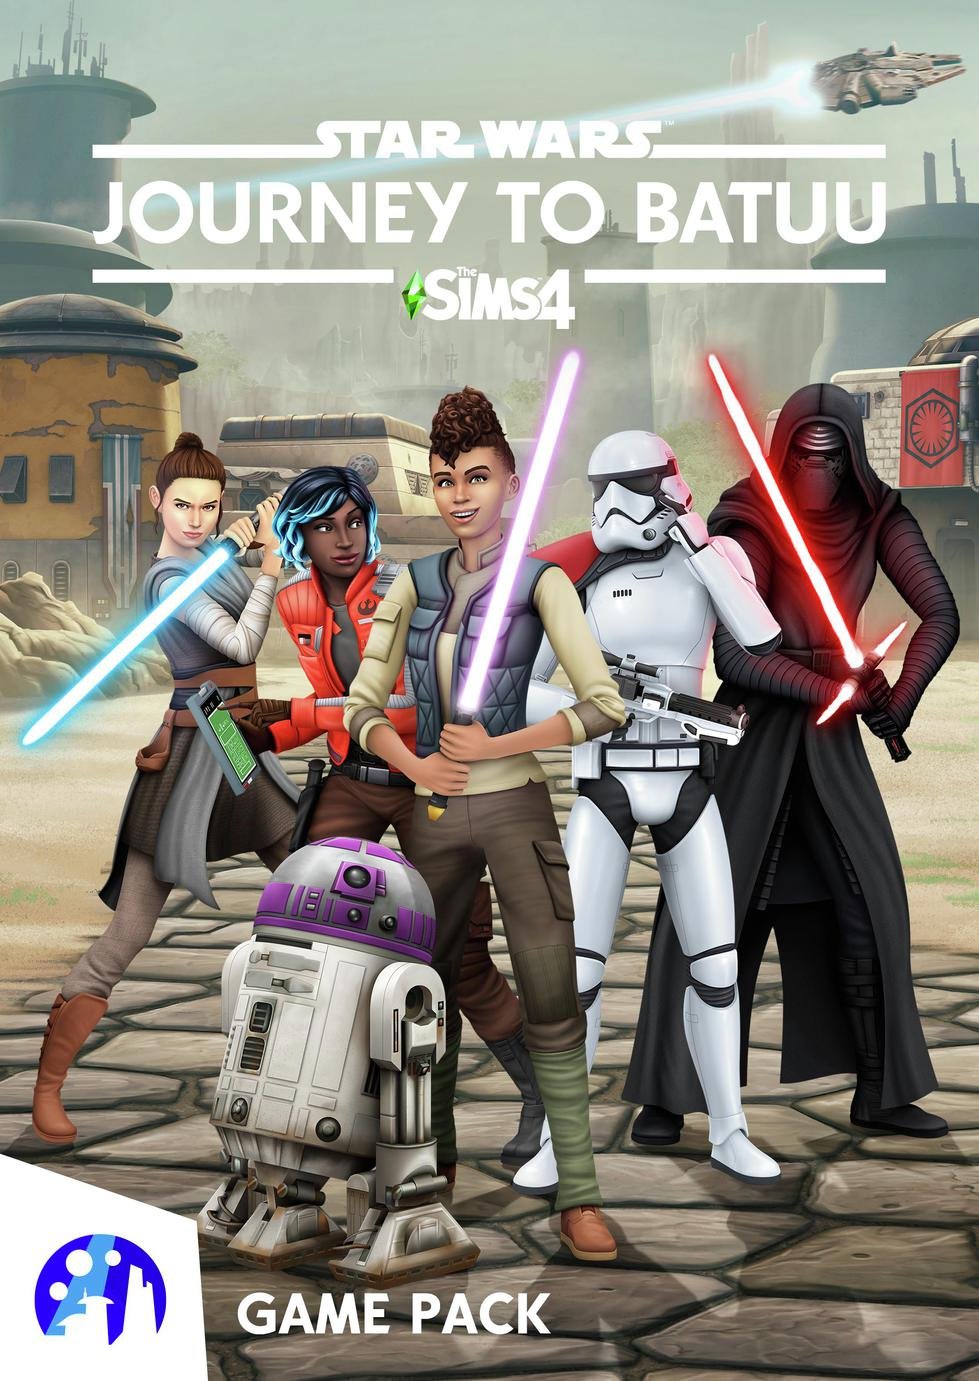 The Sims 4 Star Wars: Journey To Batuu Game Pack PC Game